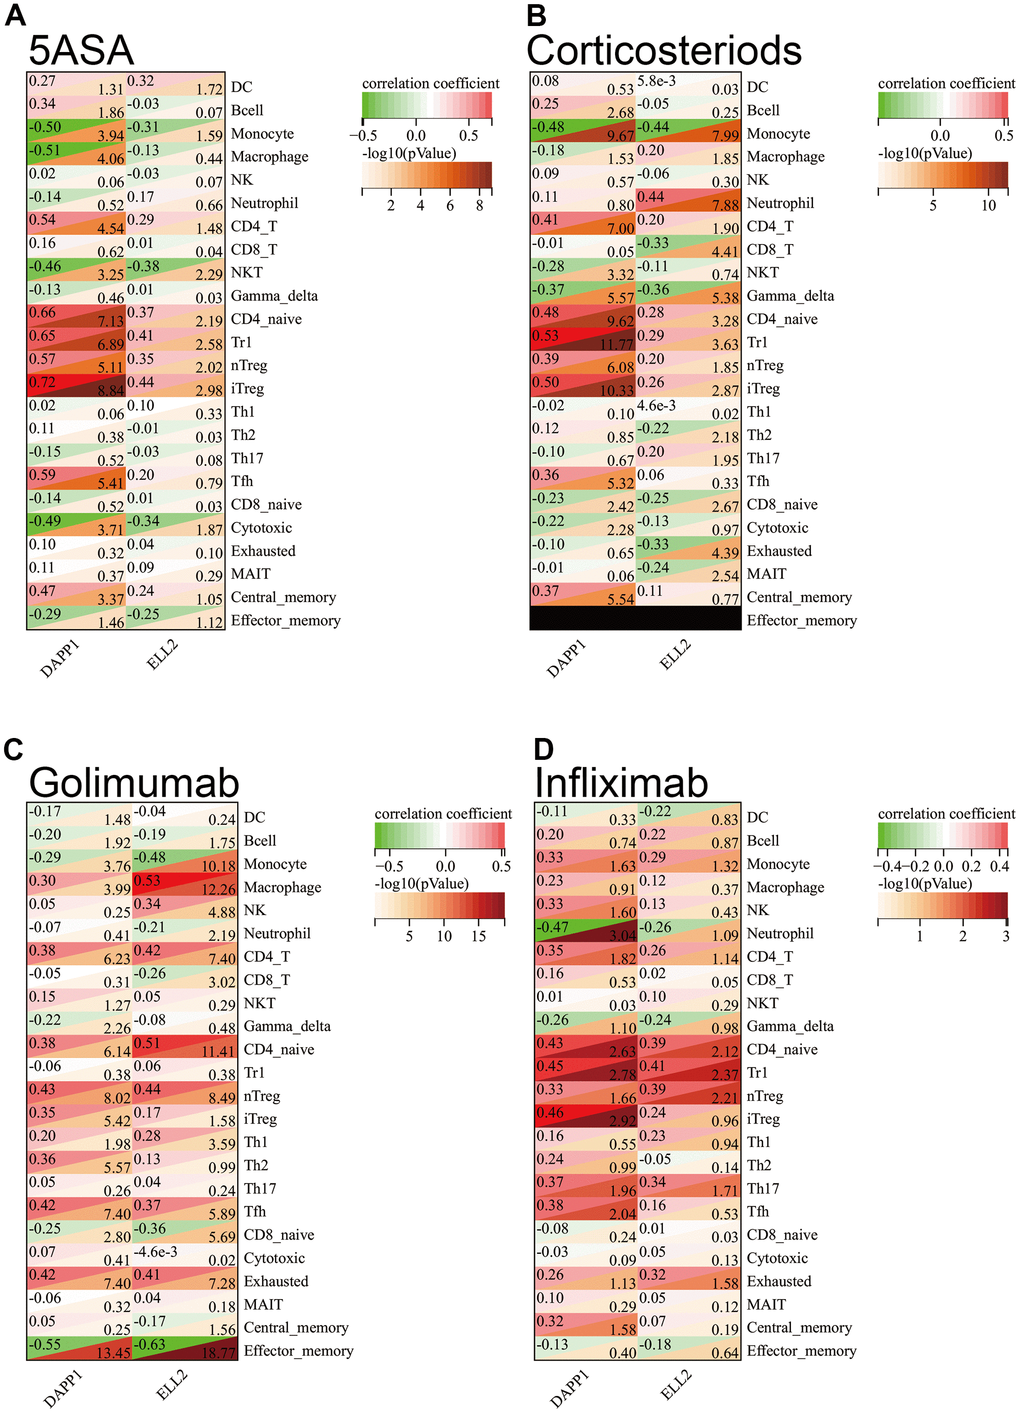 The Spearman correlation analysis demonstrated the correlation between gene expression levels of DAPP1 and ELL2 and the extent of immune cell infiltration in cohorts of UC patients who received 5-ASA (A), corticosteroids (B), golimumab (C), or infliximab (D), respectively.